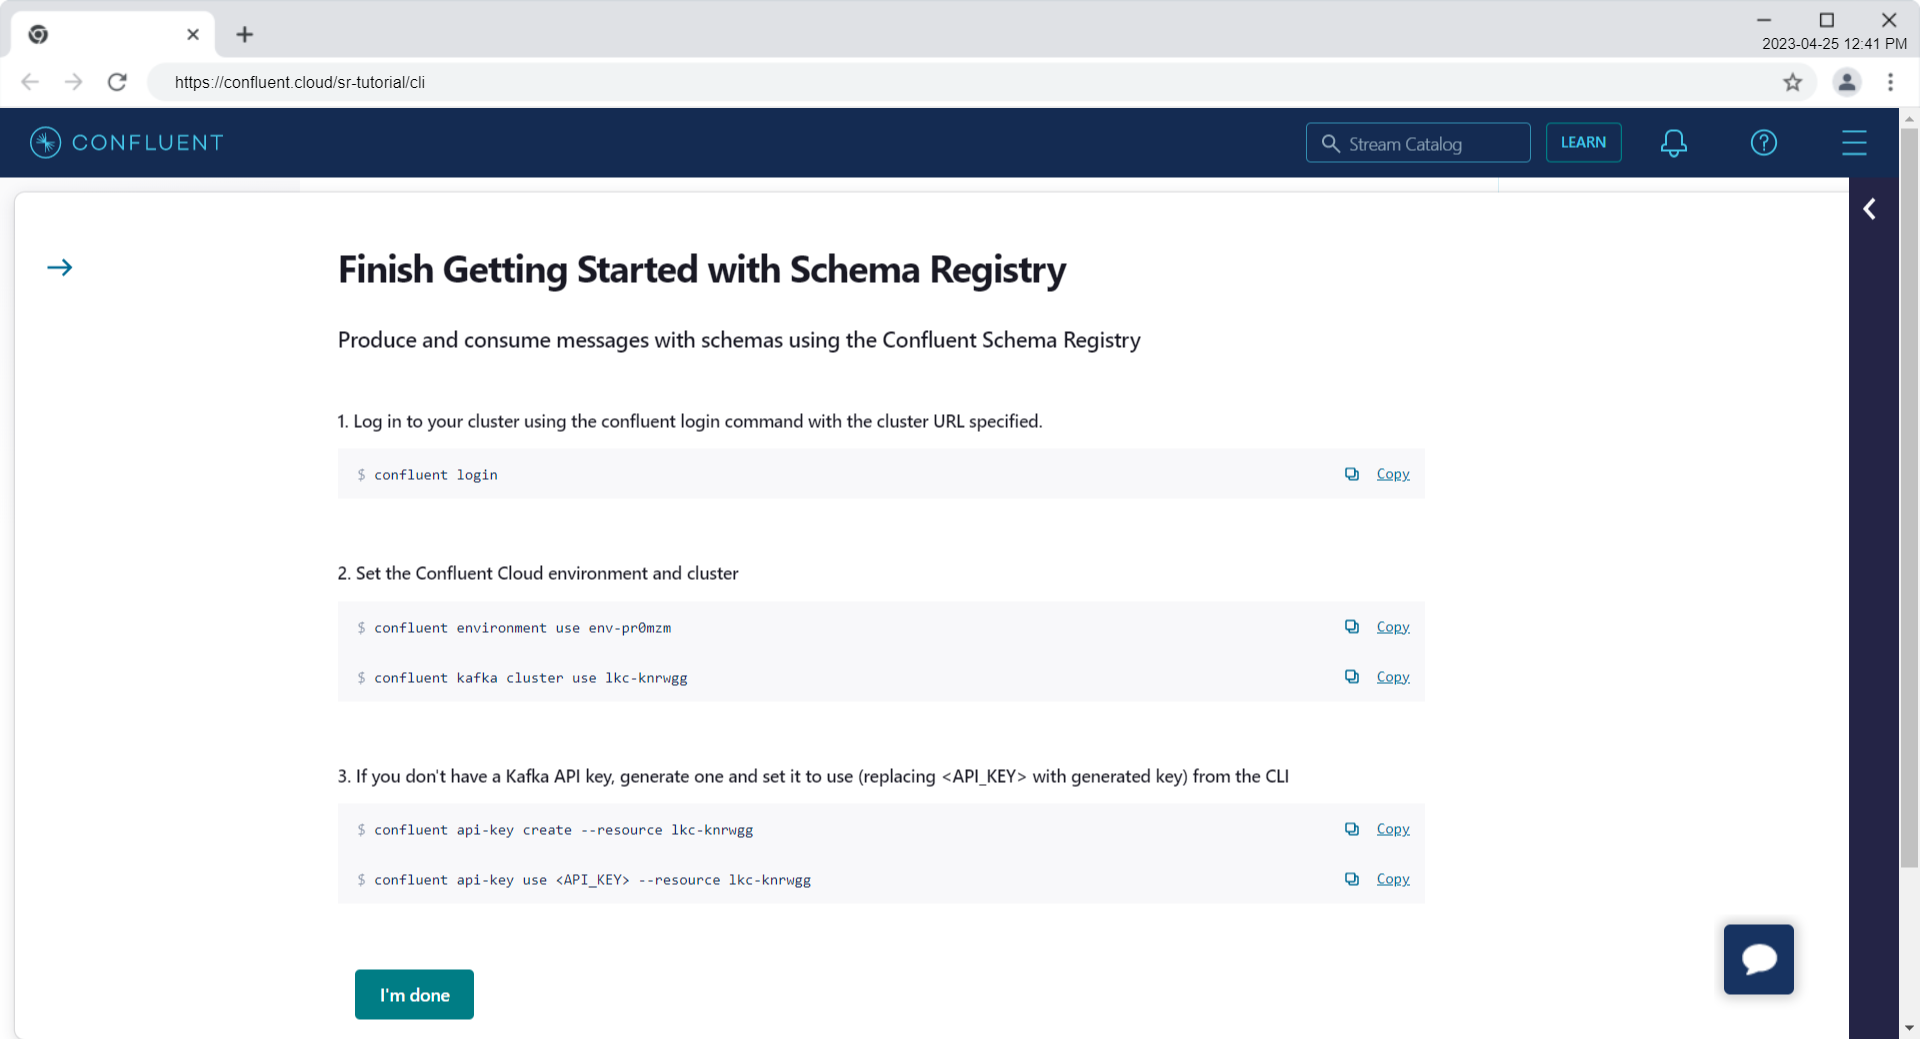 Finish Getting Started with Schema Registry